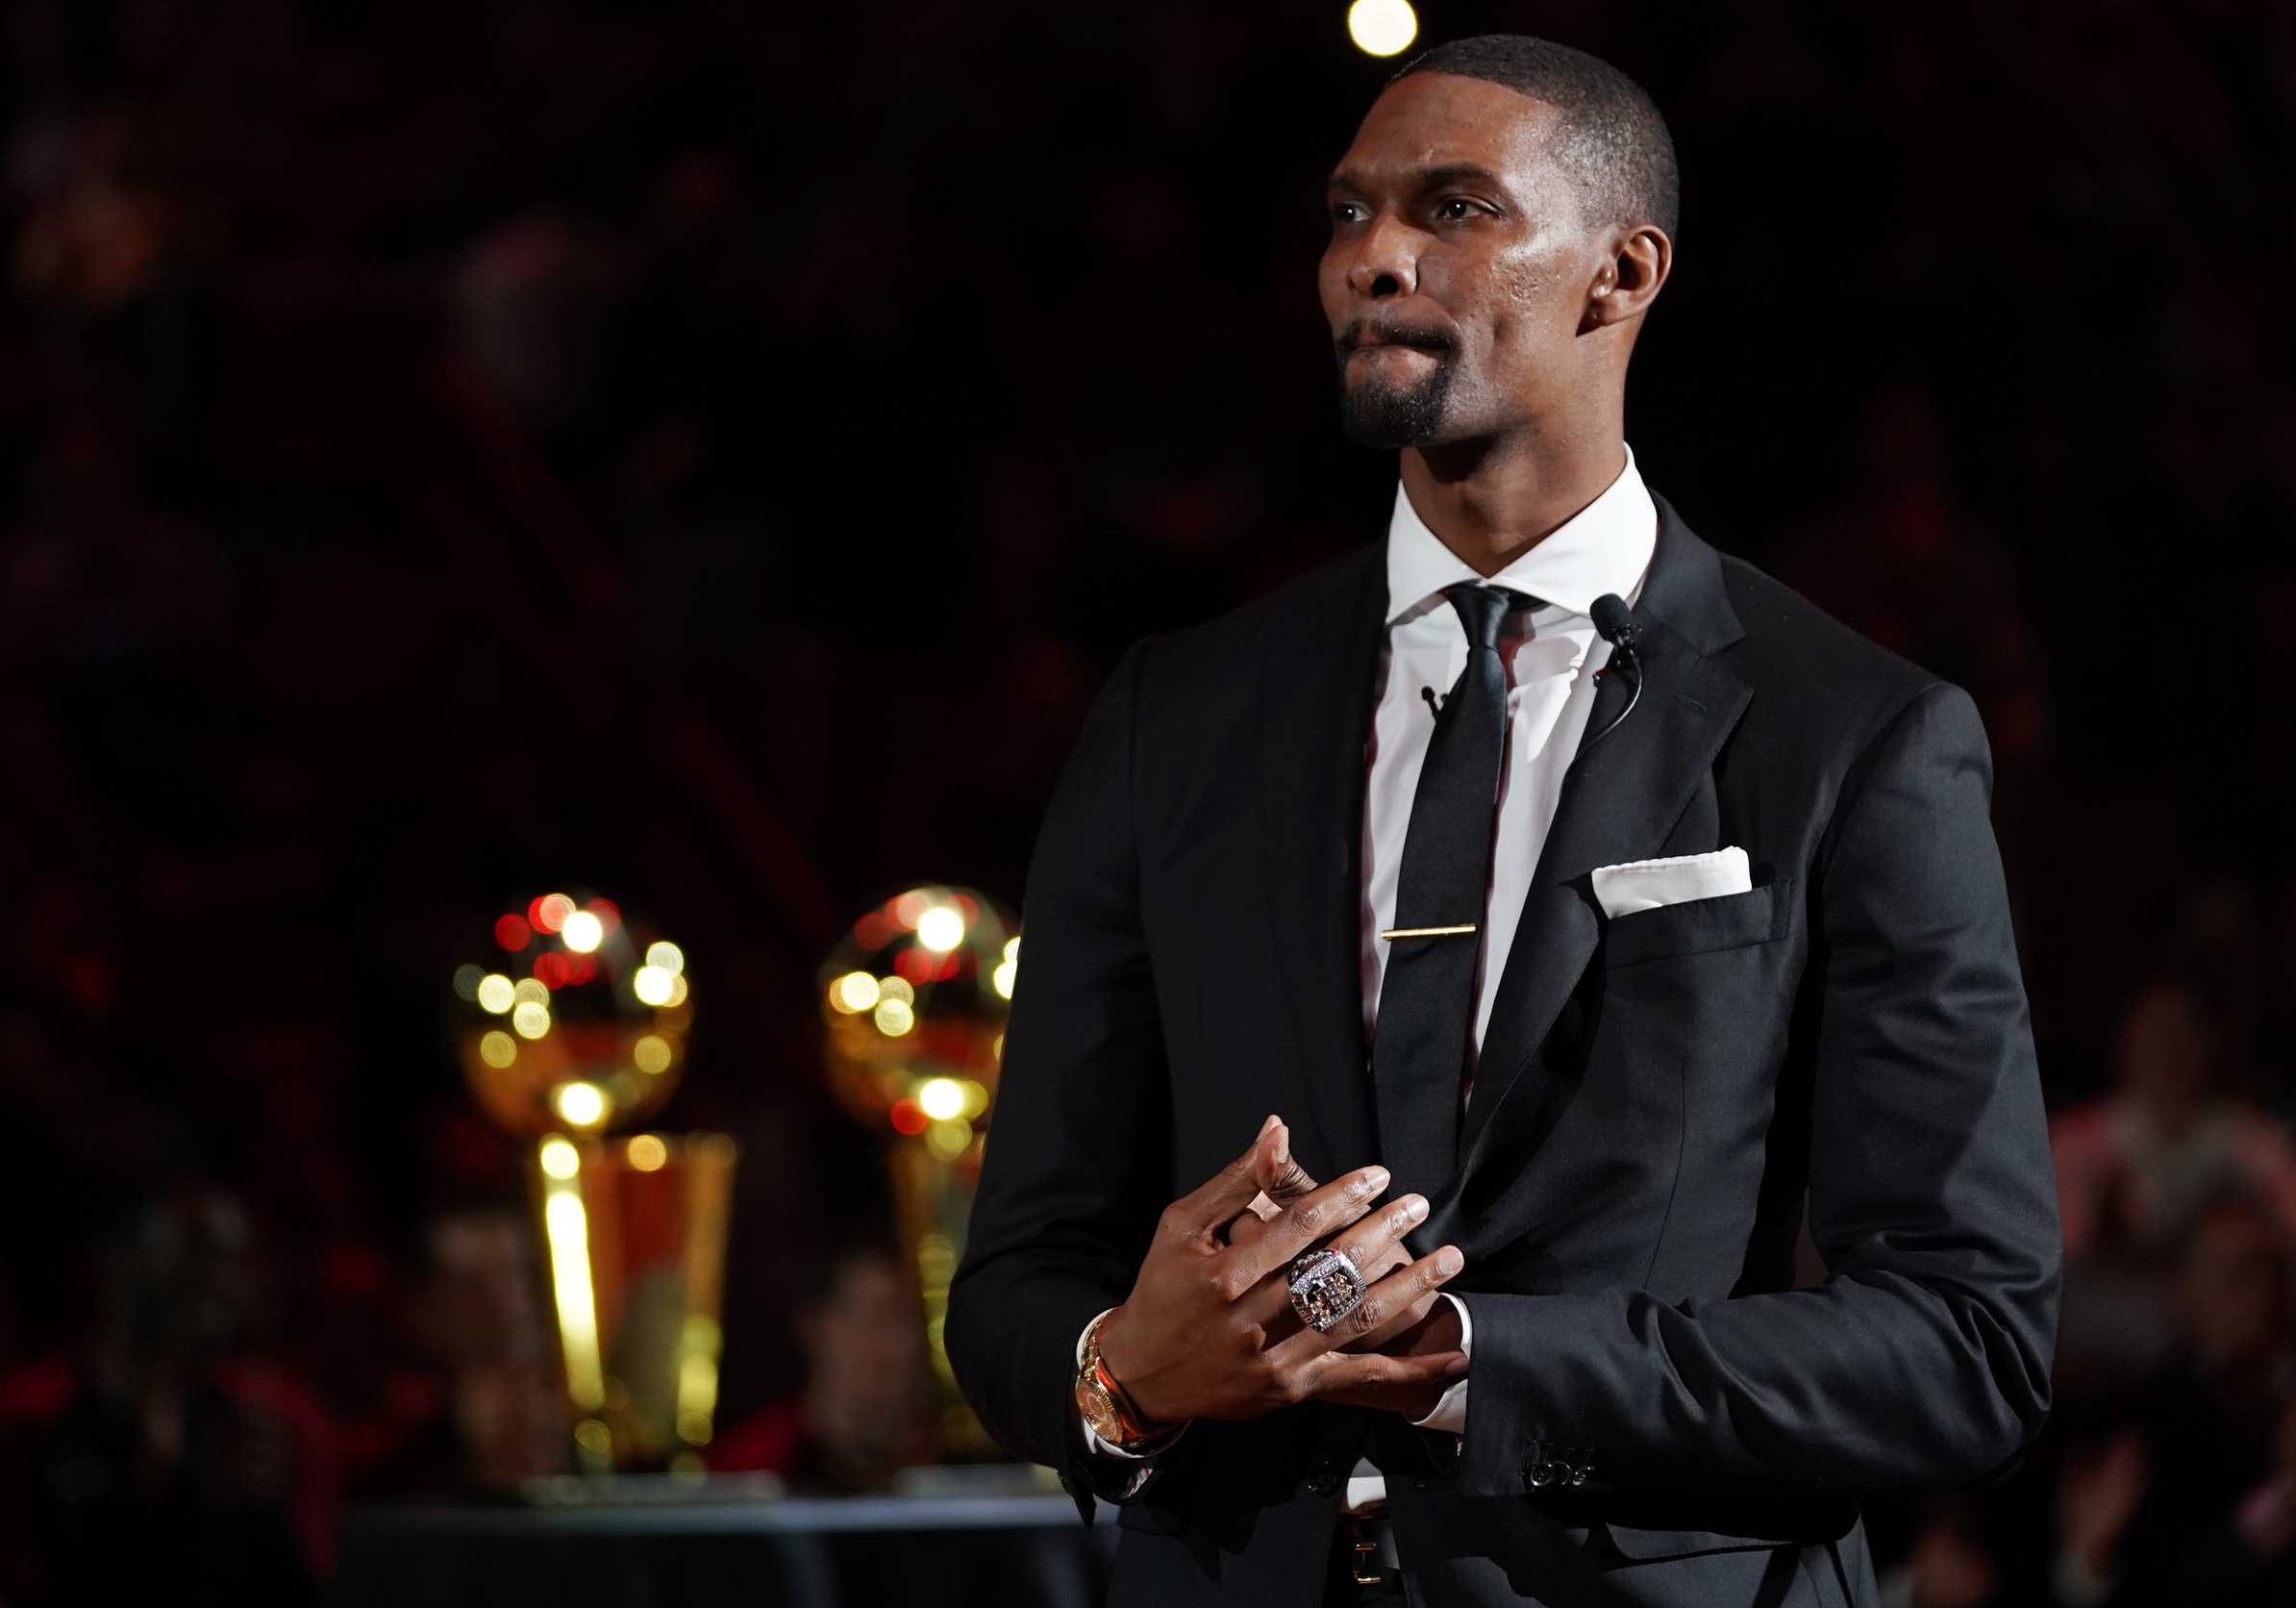 Former Heat standout Chris Bosh not among finalists for 2020 Hall of Fame4 日前